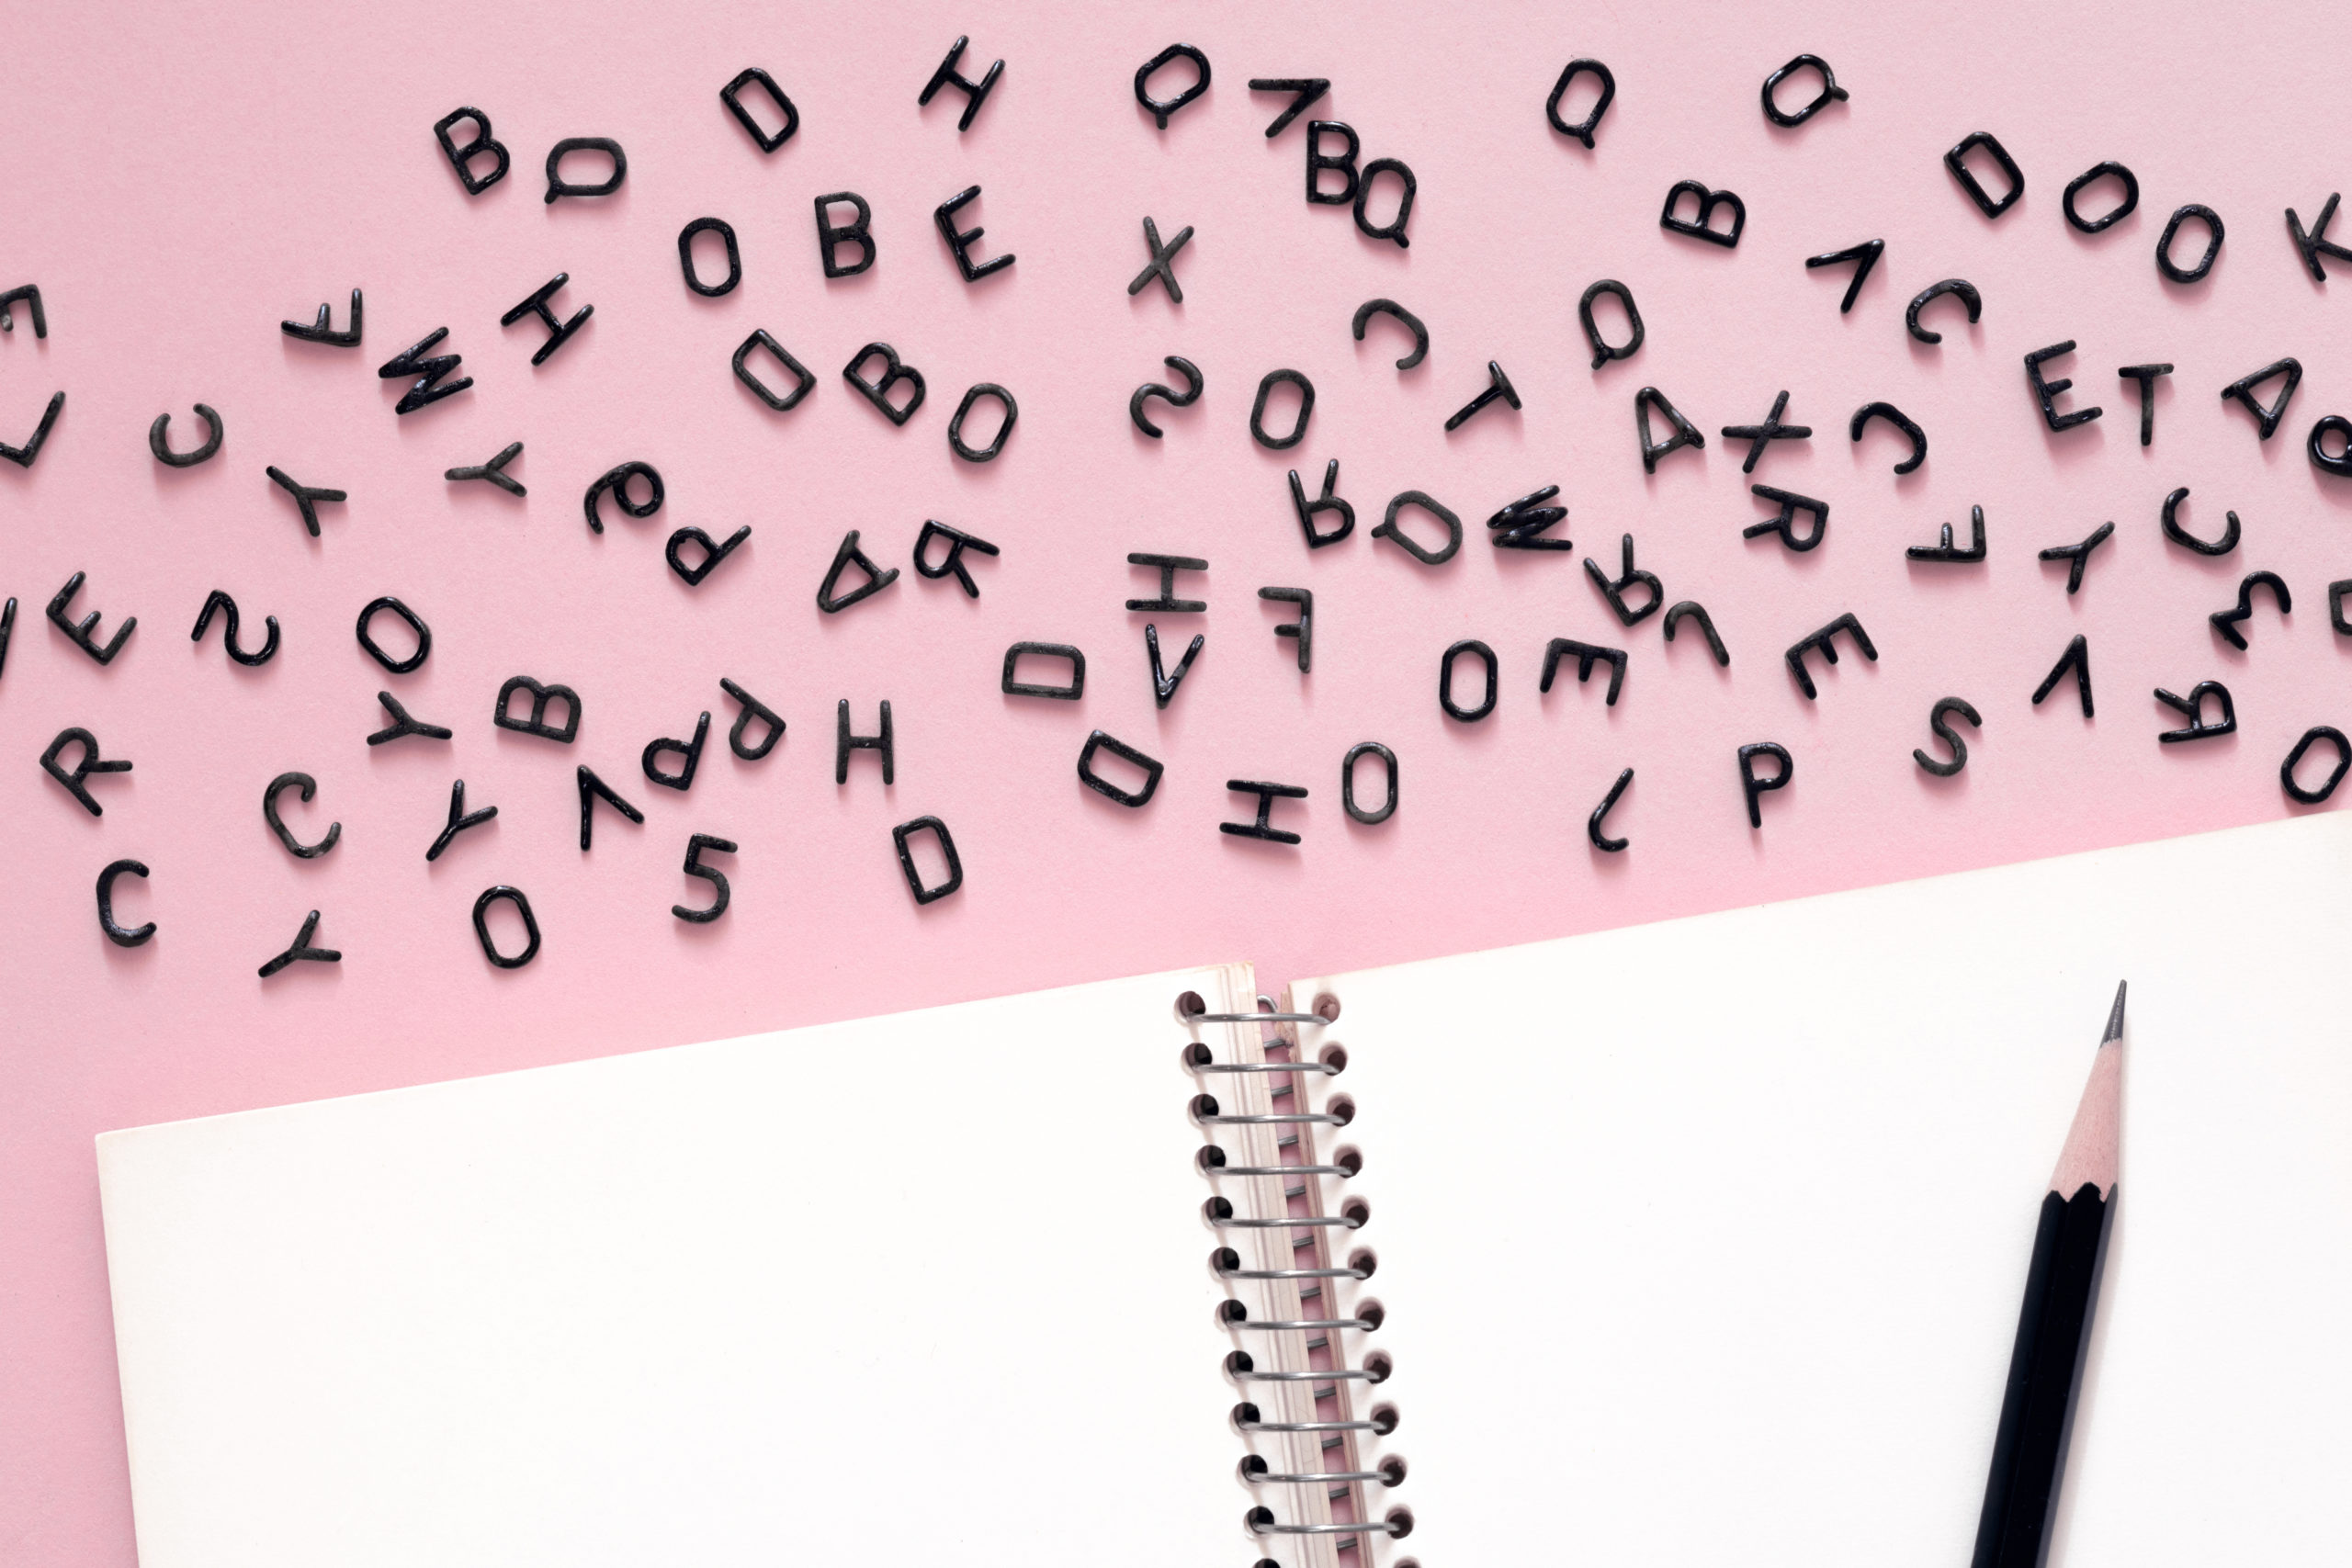 Letters of the alphabet scattered on pink surface, a clean notebook and a pencil below them.